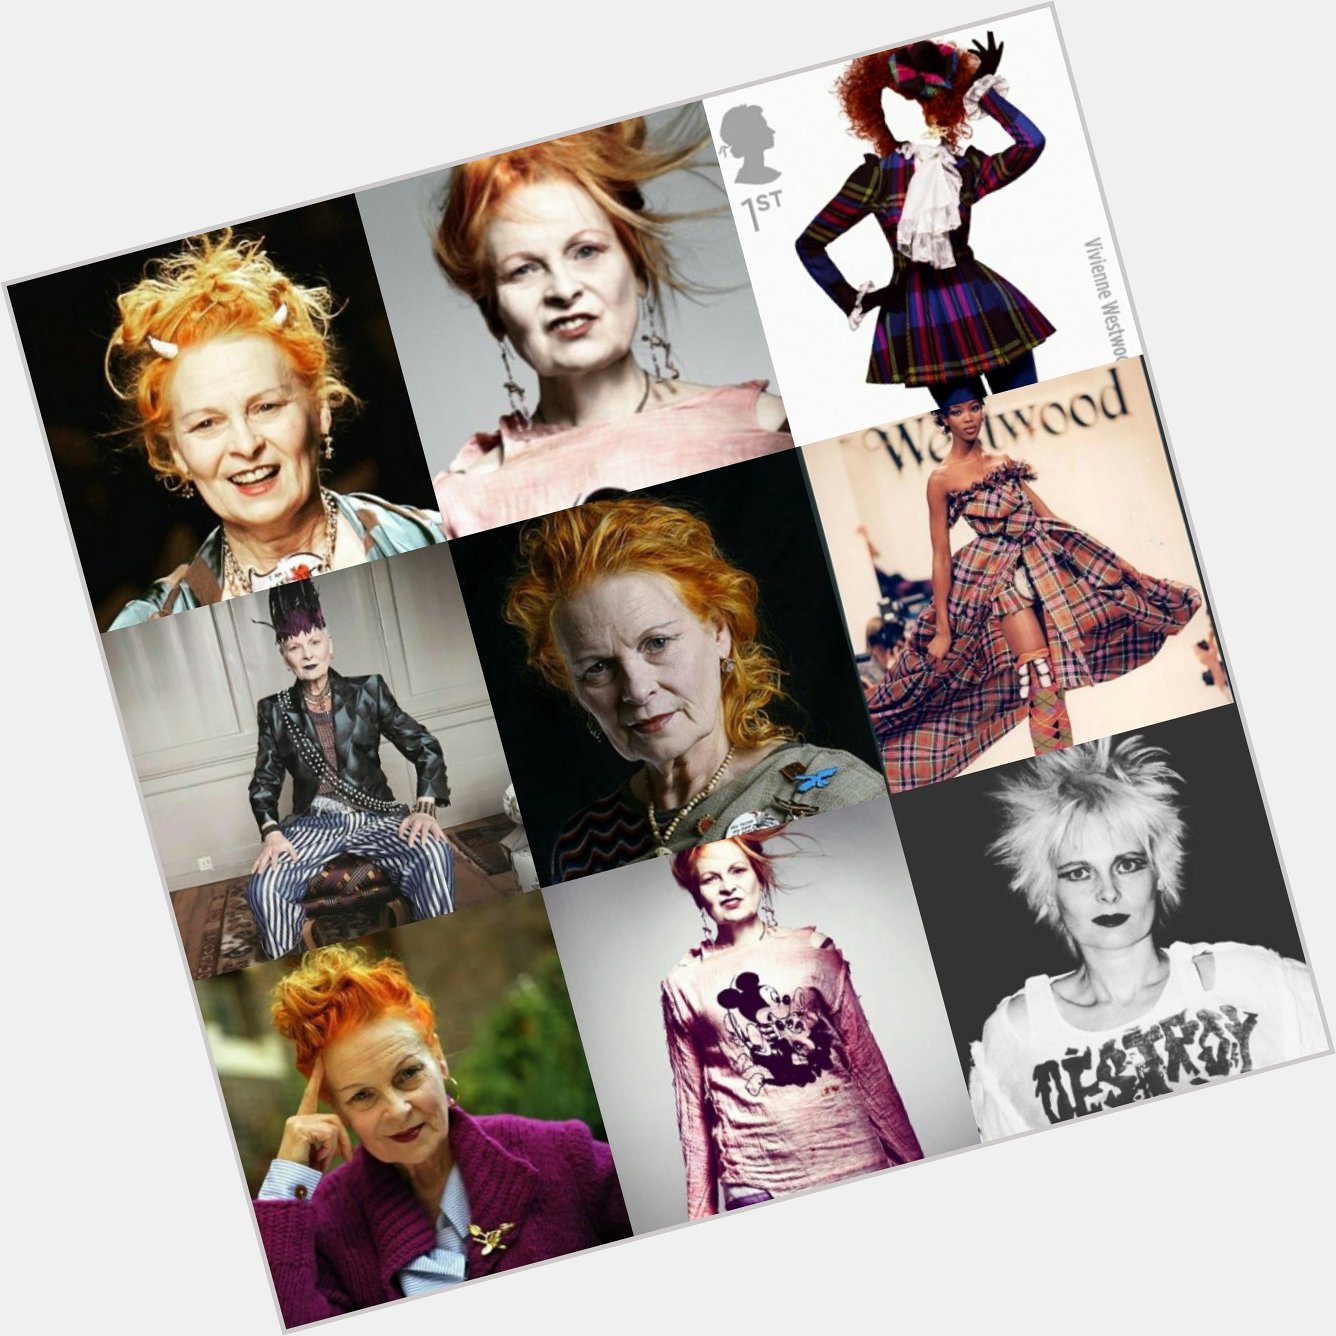 Happy 75th birthday Vivienne Westwood. She invented punk. Can\t get much cooler than that! 